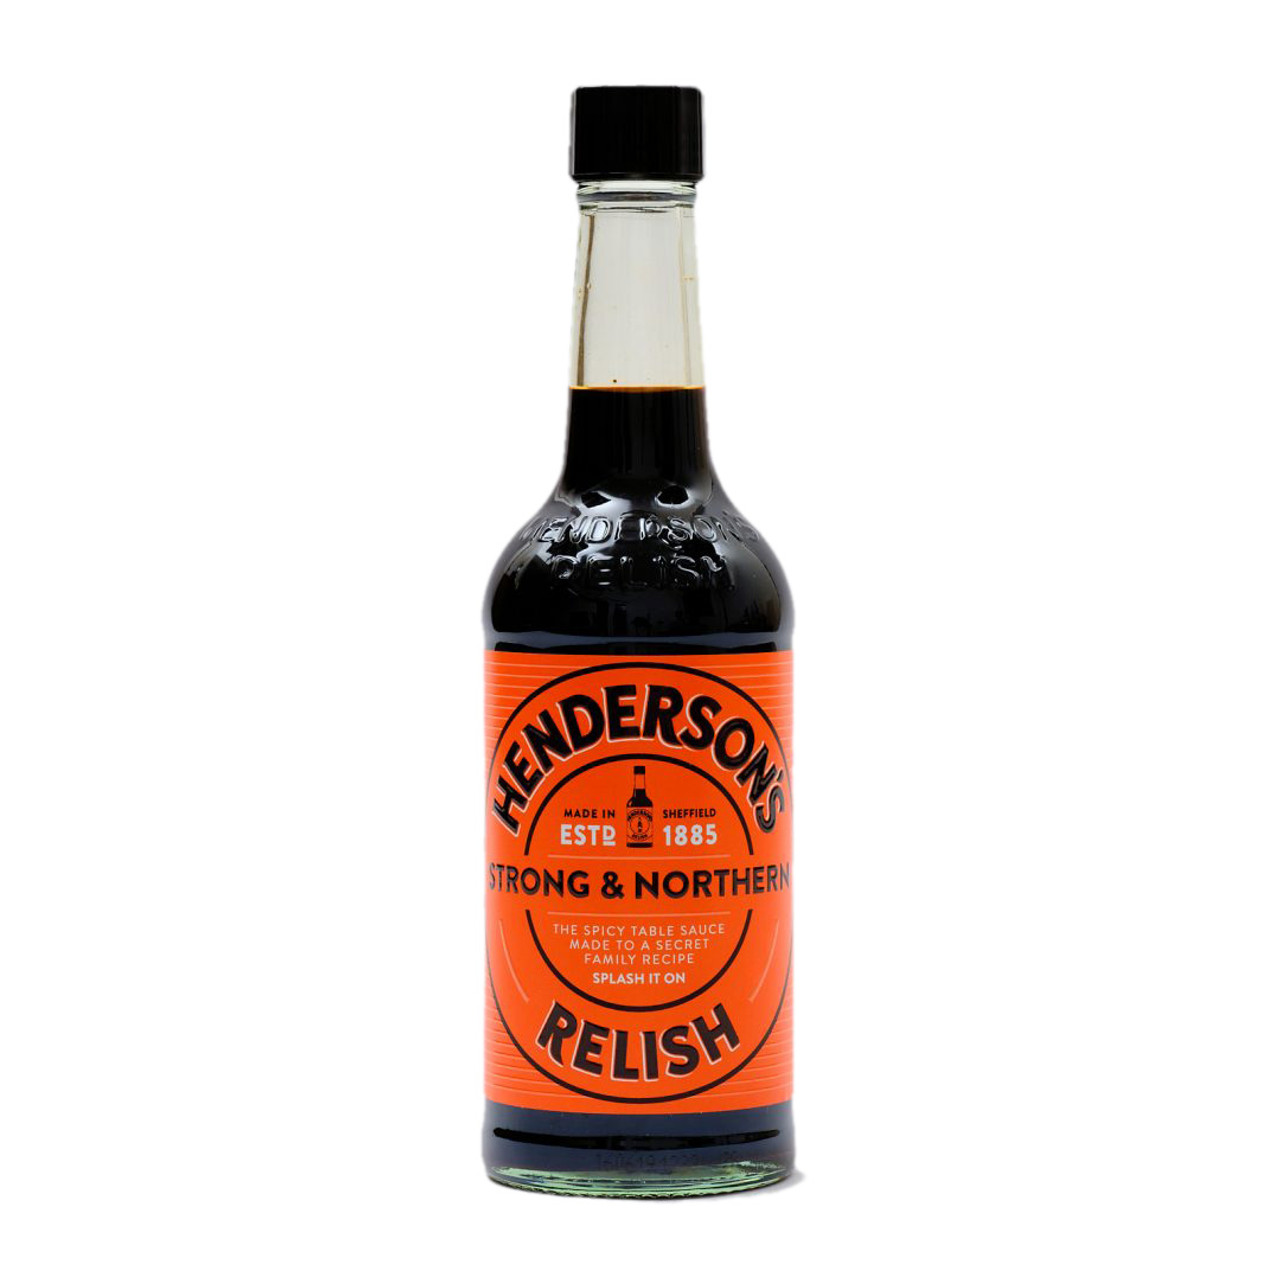 HENDERSON'S - STRONG & NORTHERN RELISH - 248ML